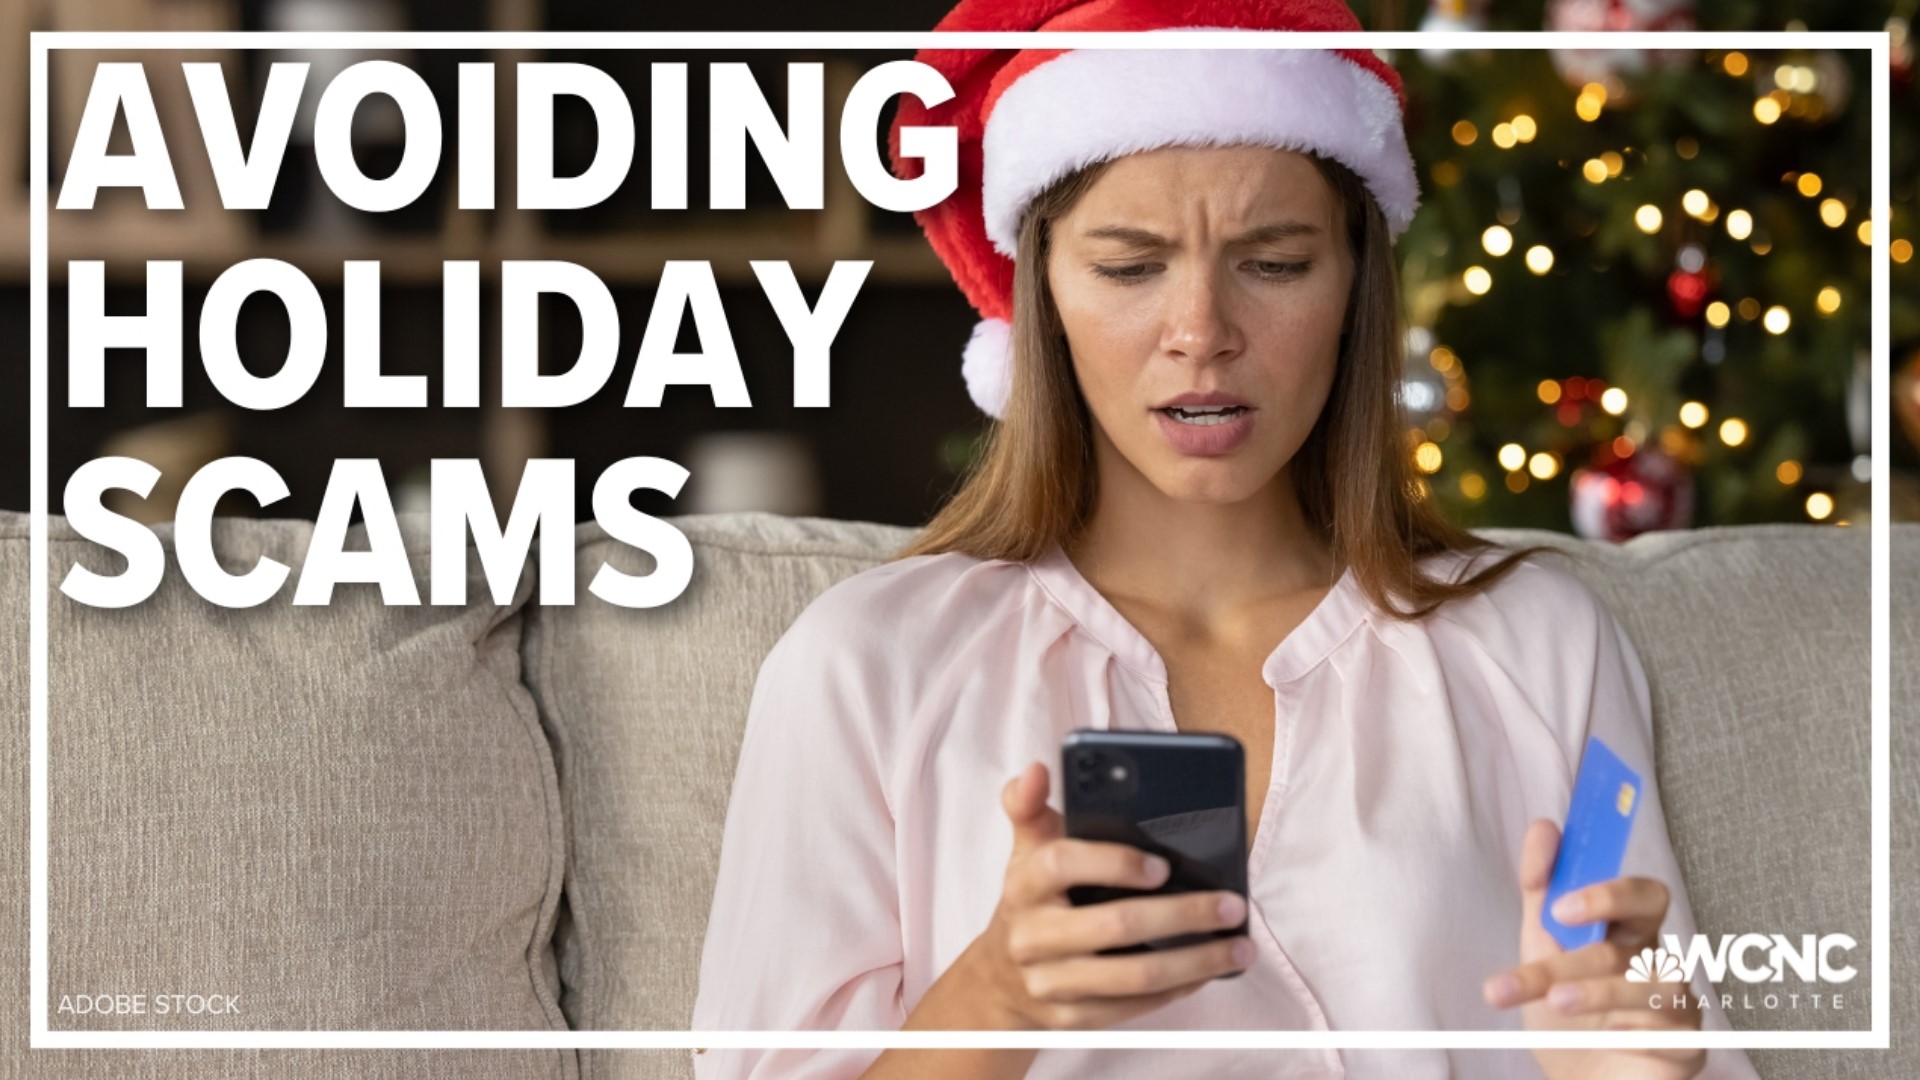 We've got some tips you should keep in mind if you're hoping to take advantage of the holiday deals.